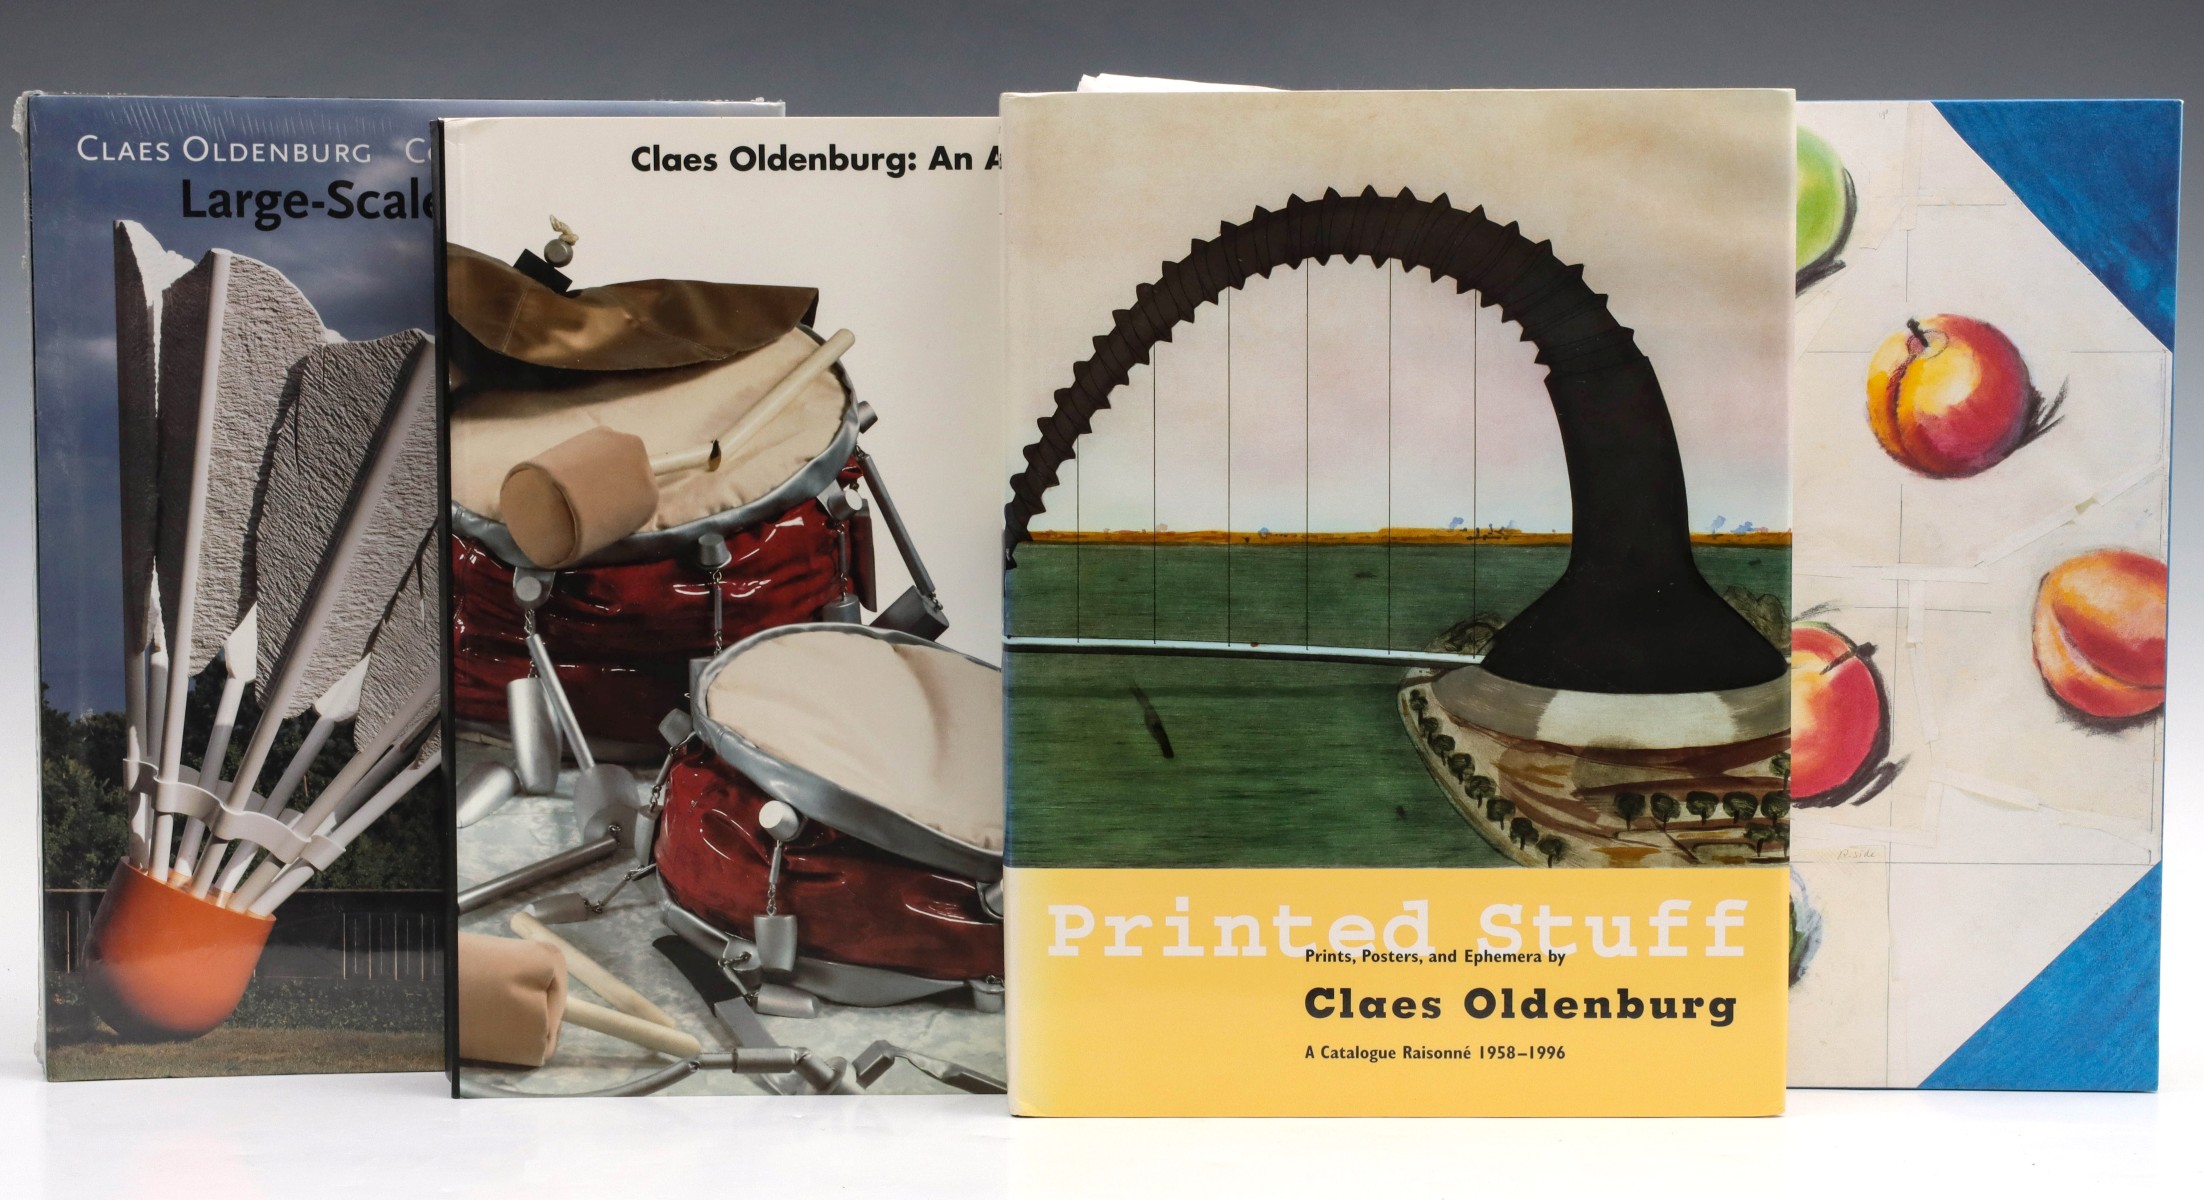 ILLUSTRATED BOOKS ON THE WORK OF CLAES OLDENBERG